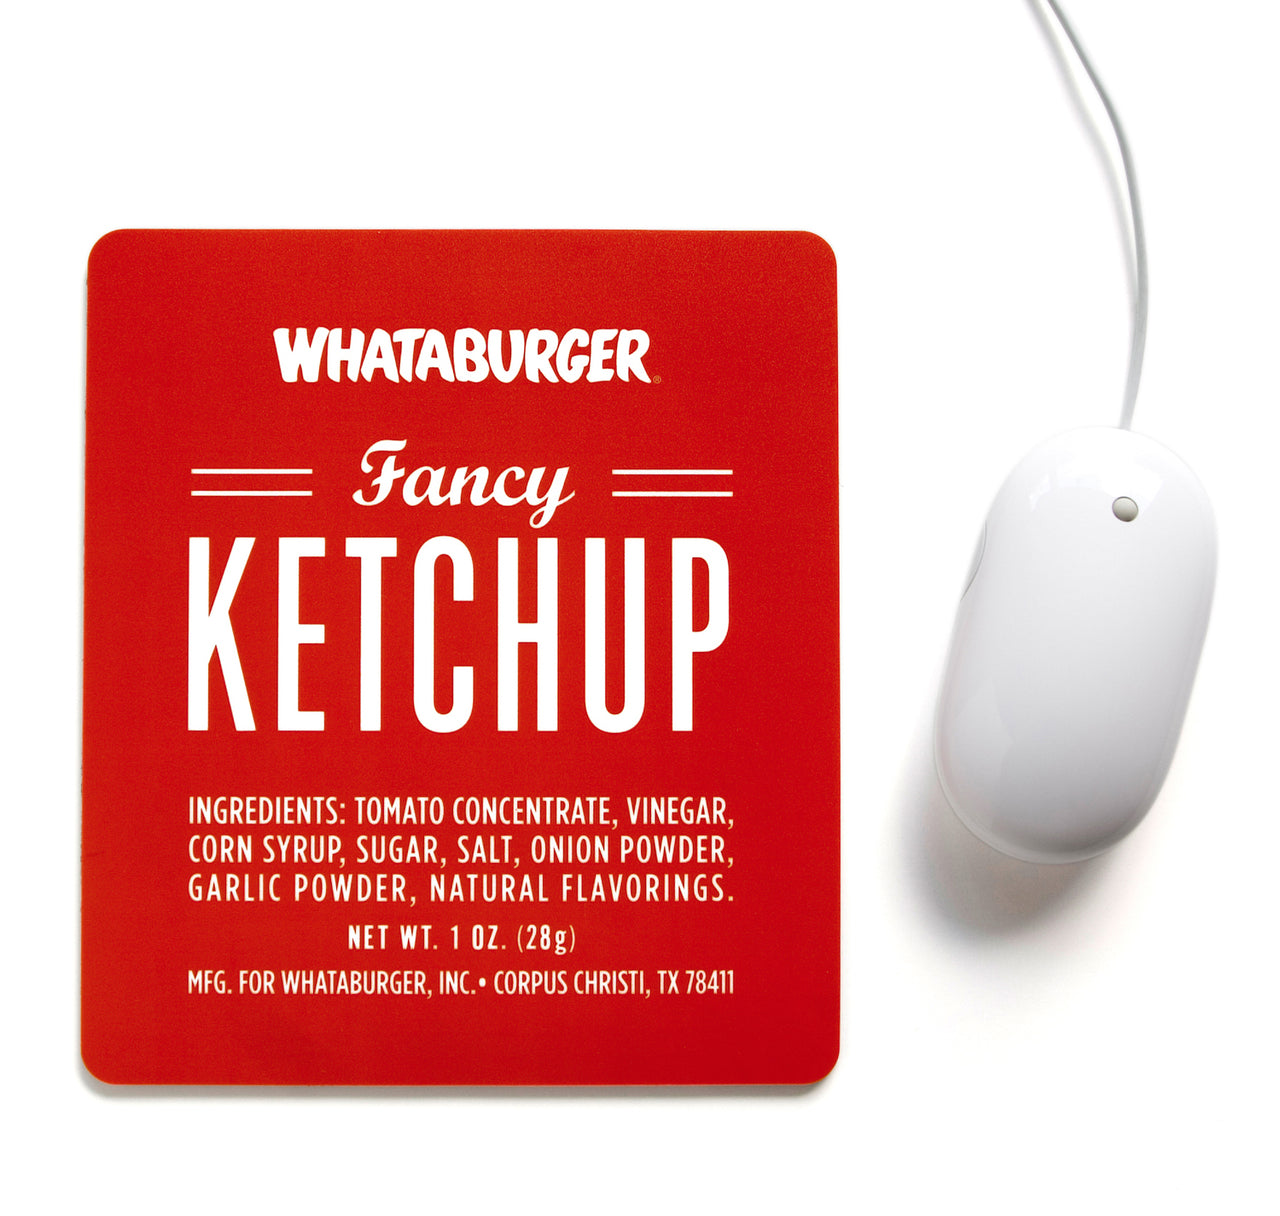 Whataburger adds ketchup pillows, running shoes, doormat, and more to shop